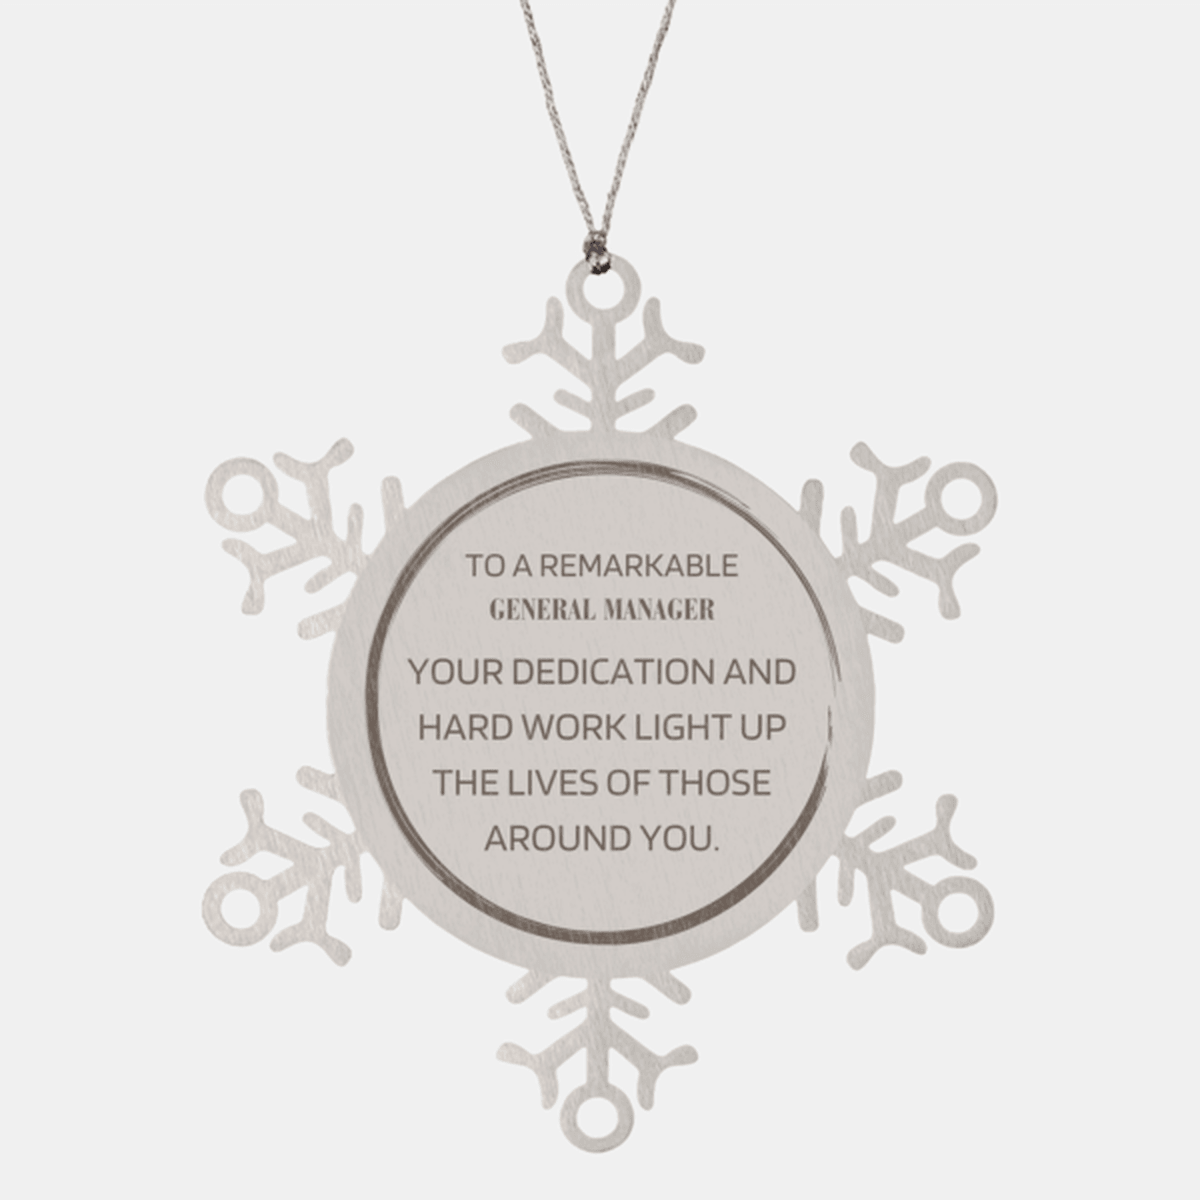 Remarkable General Manager Gifts, Your dedication and hard work, Inspirational Birthday Christmas Unique Snowflake Ornament For General Manager, Coworkers, Men, Women, Friends - Mallard Moon Gift Shop